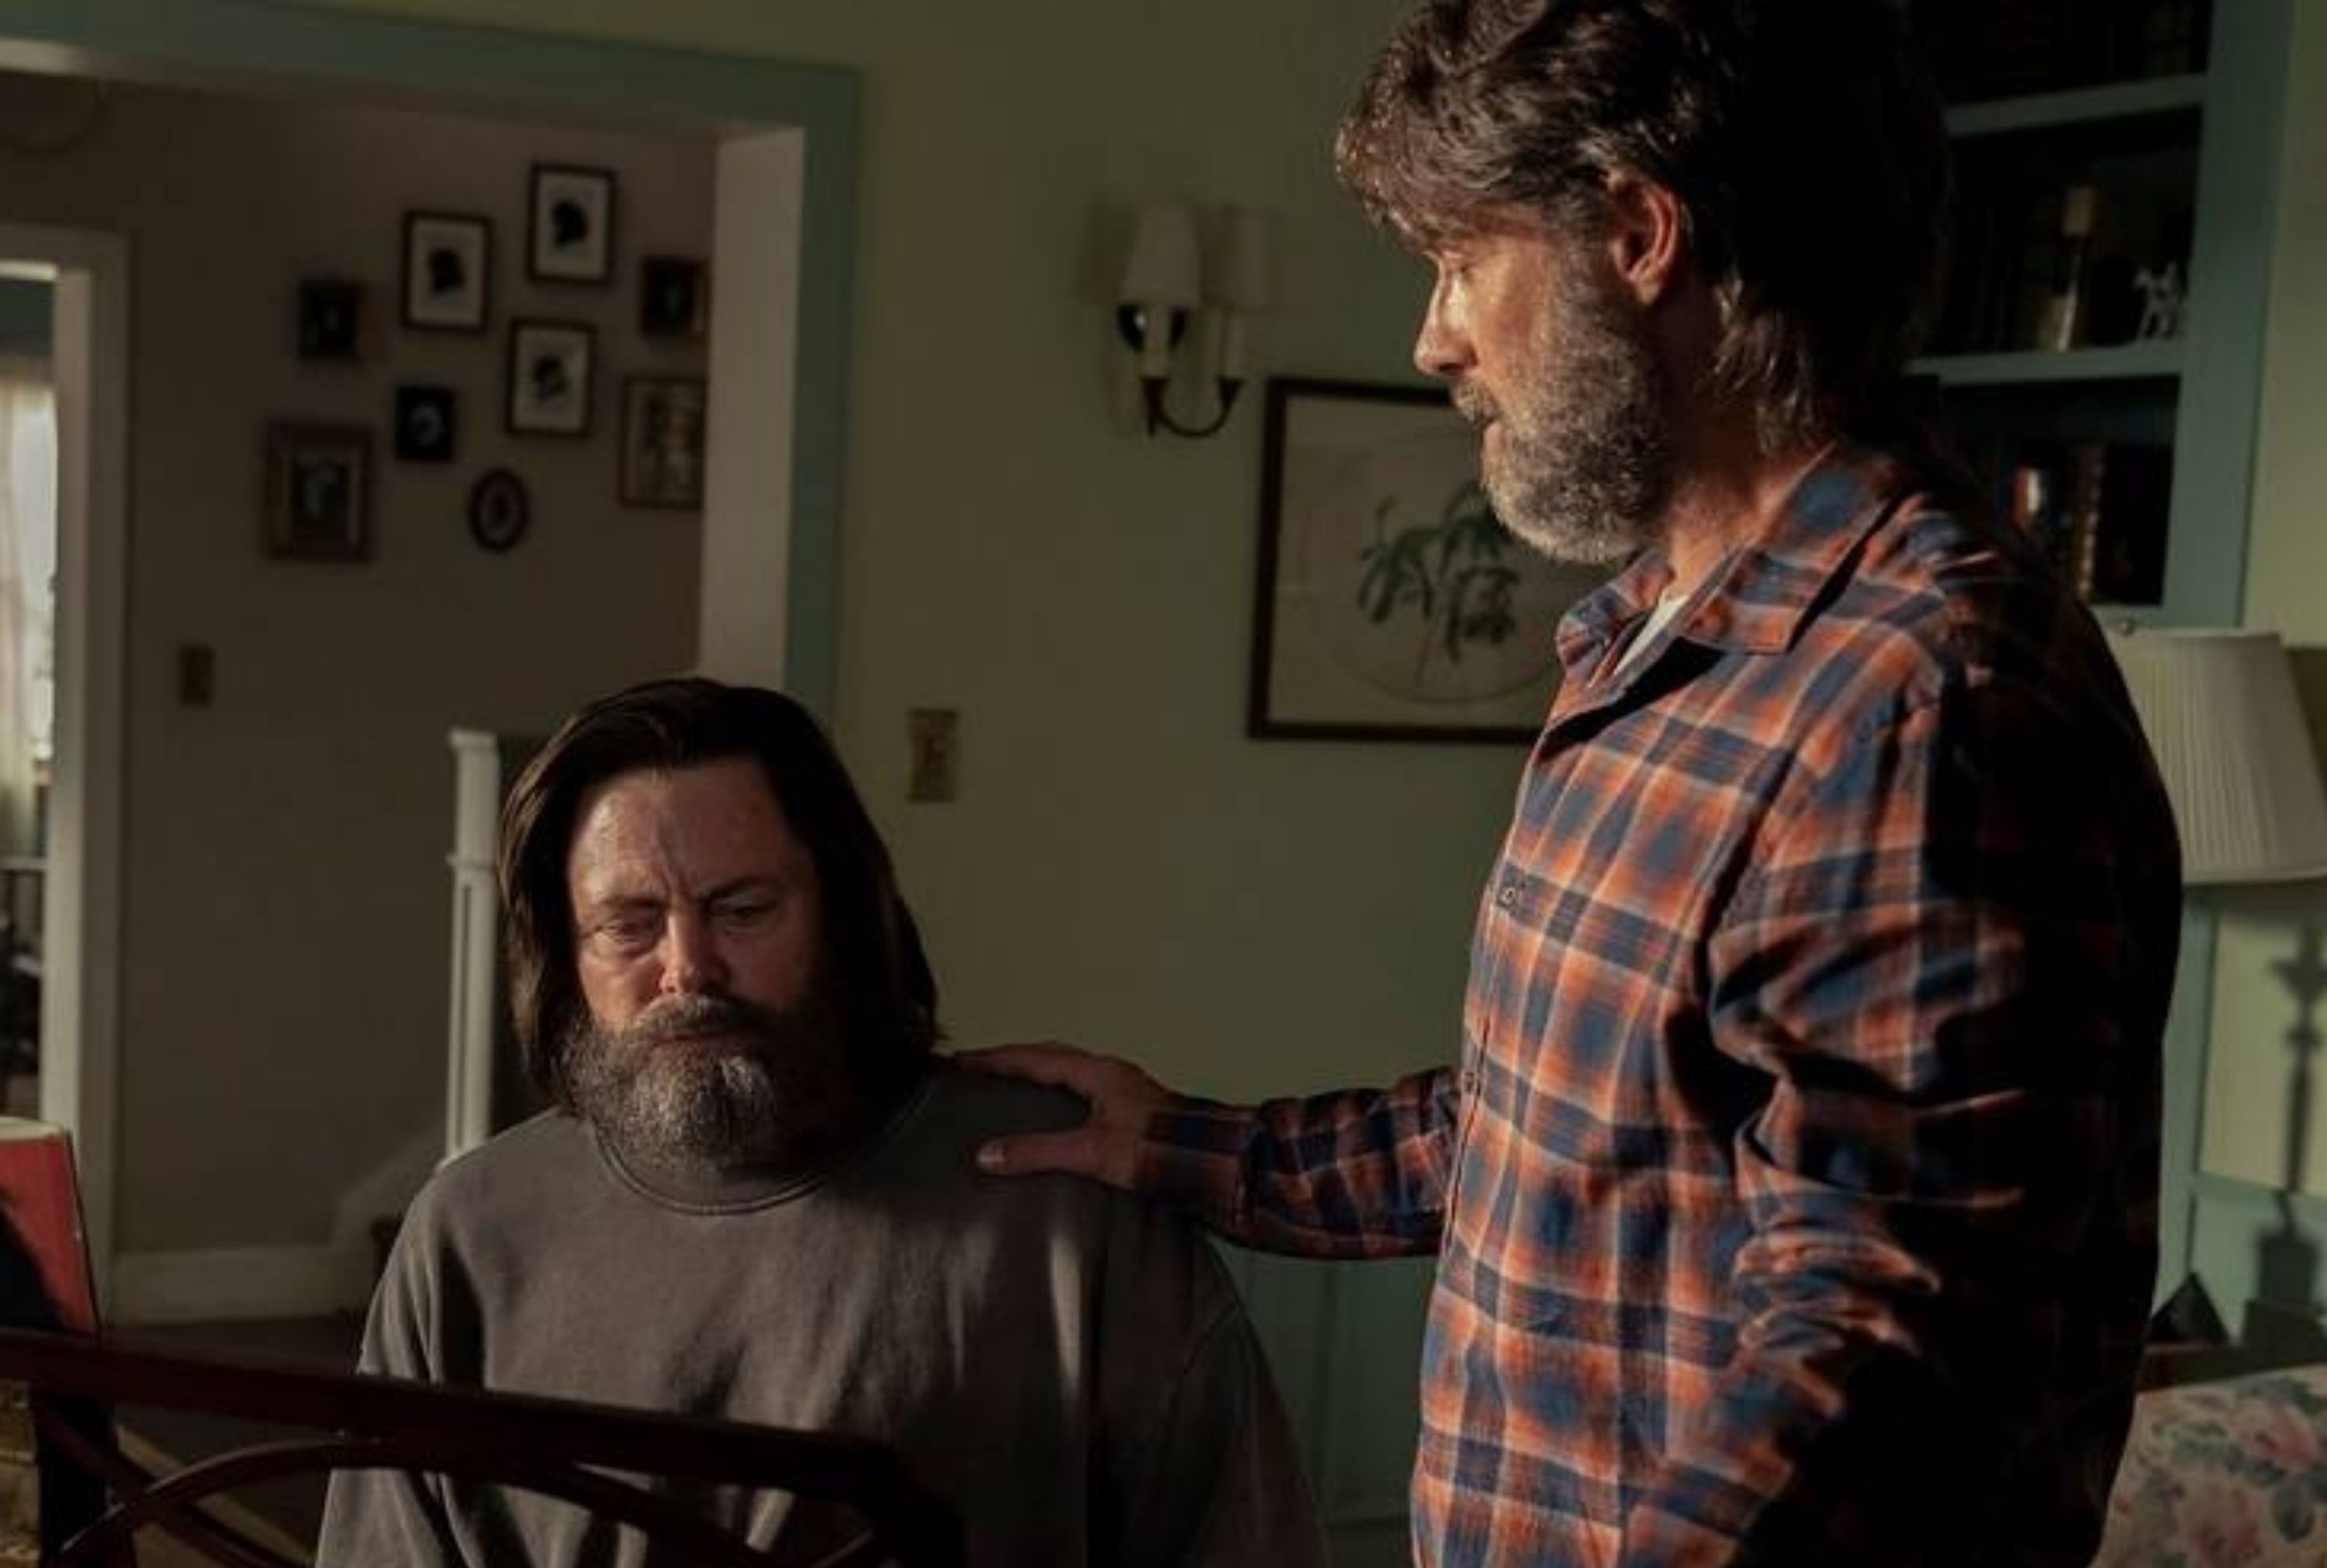 Nick Offerman as Bill and Murray Bartlett as Frank in Season 1 Episode 3 of The Last of Us